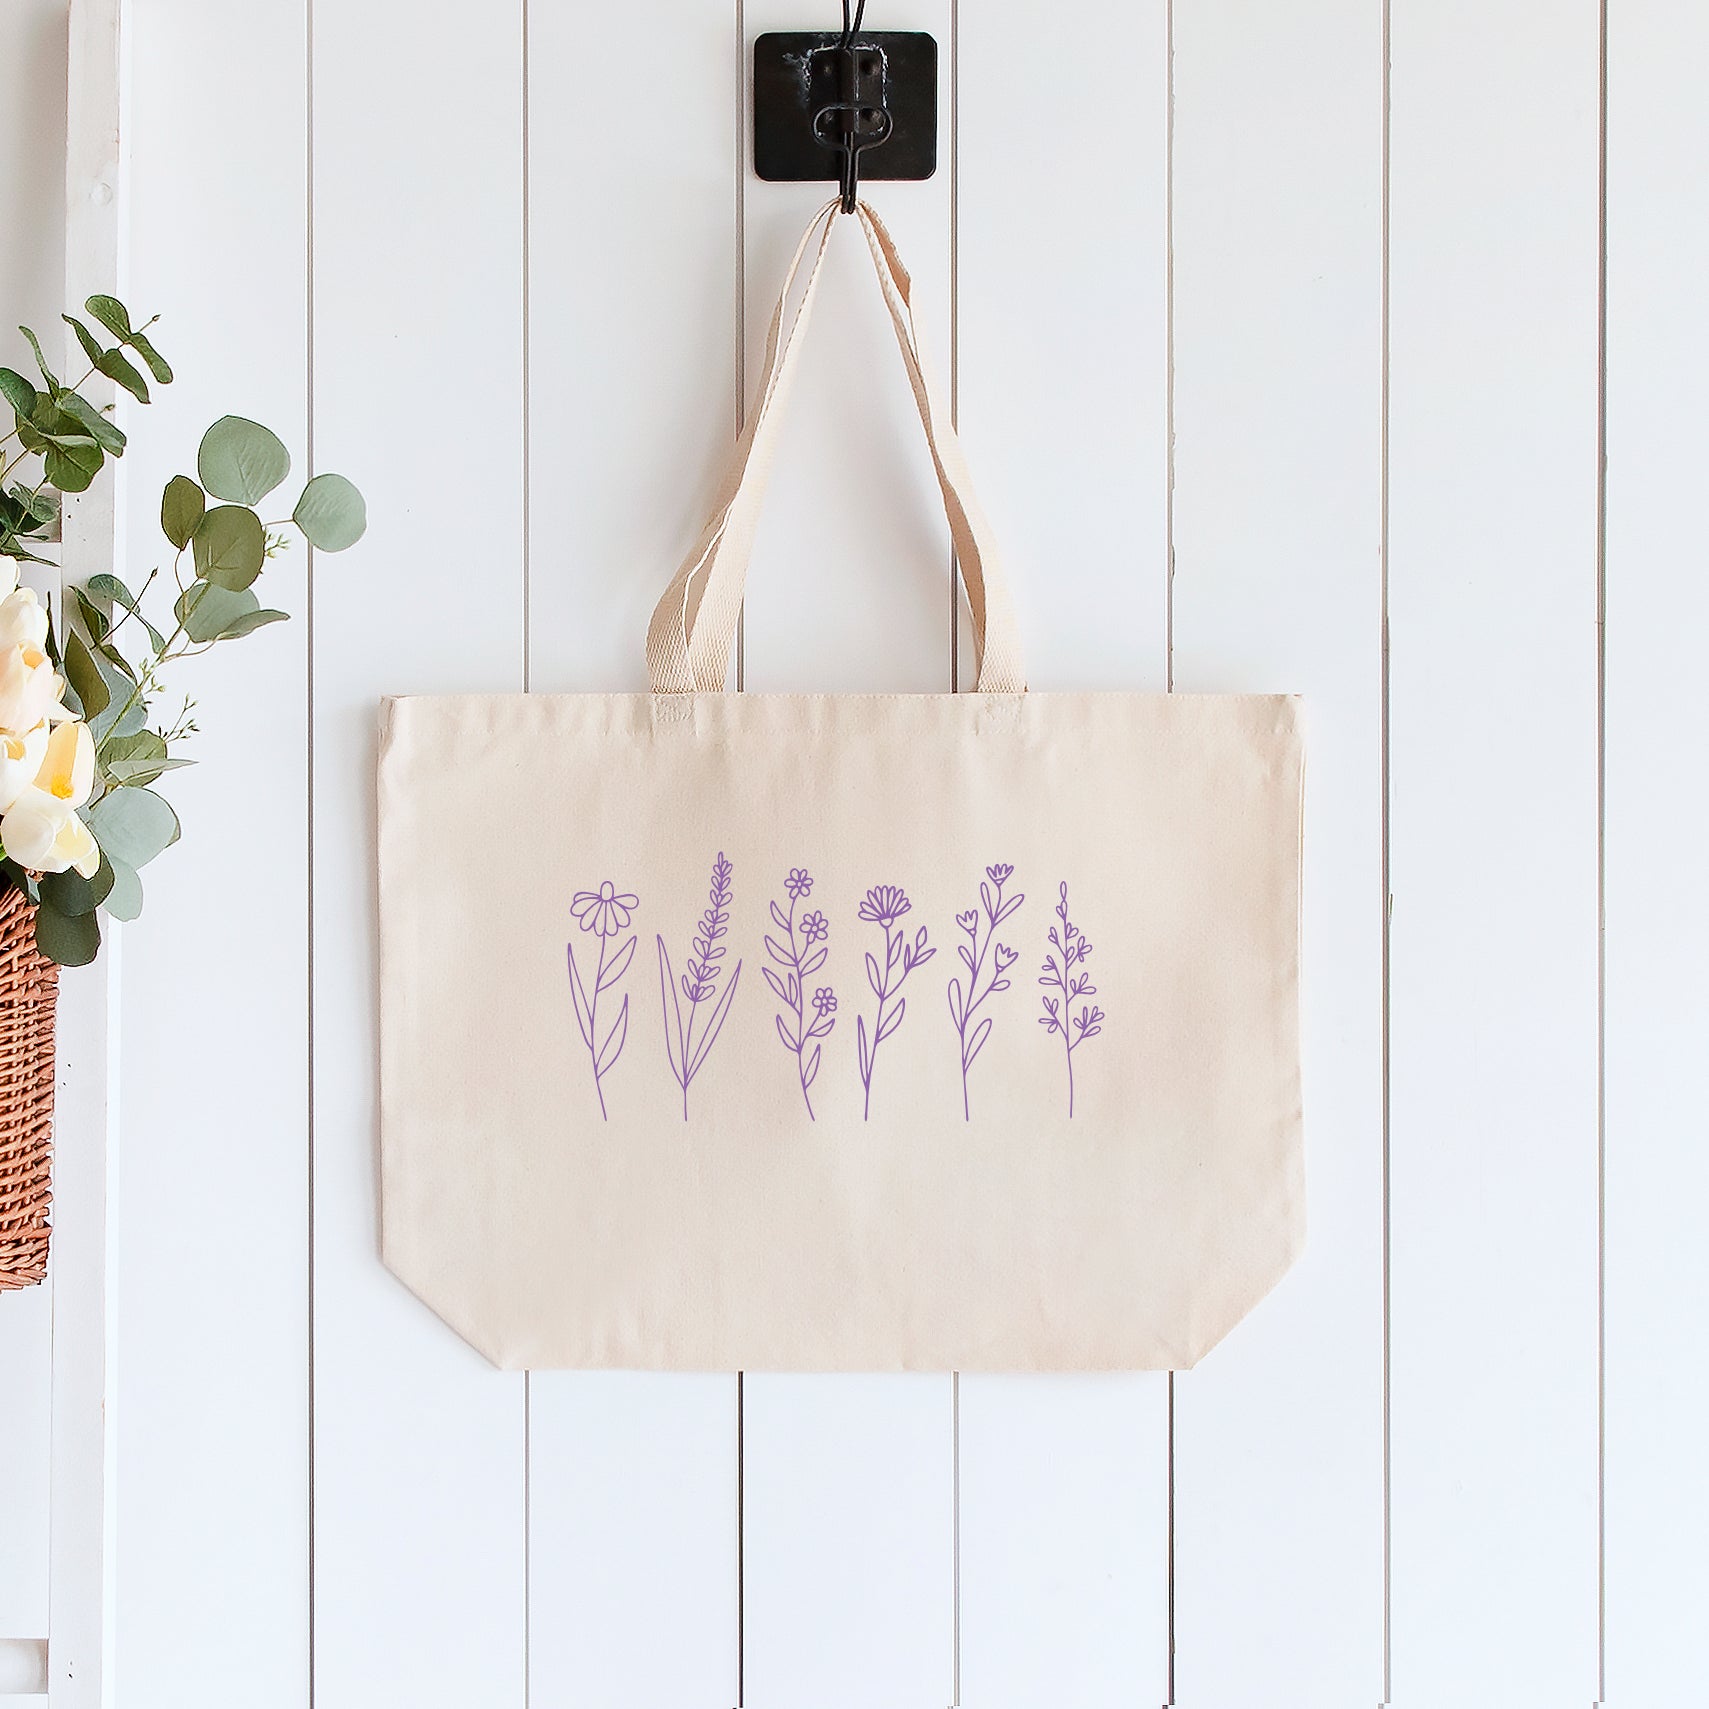 Butterfly and Flowers Large Canvas Tote Bag